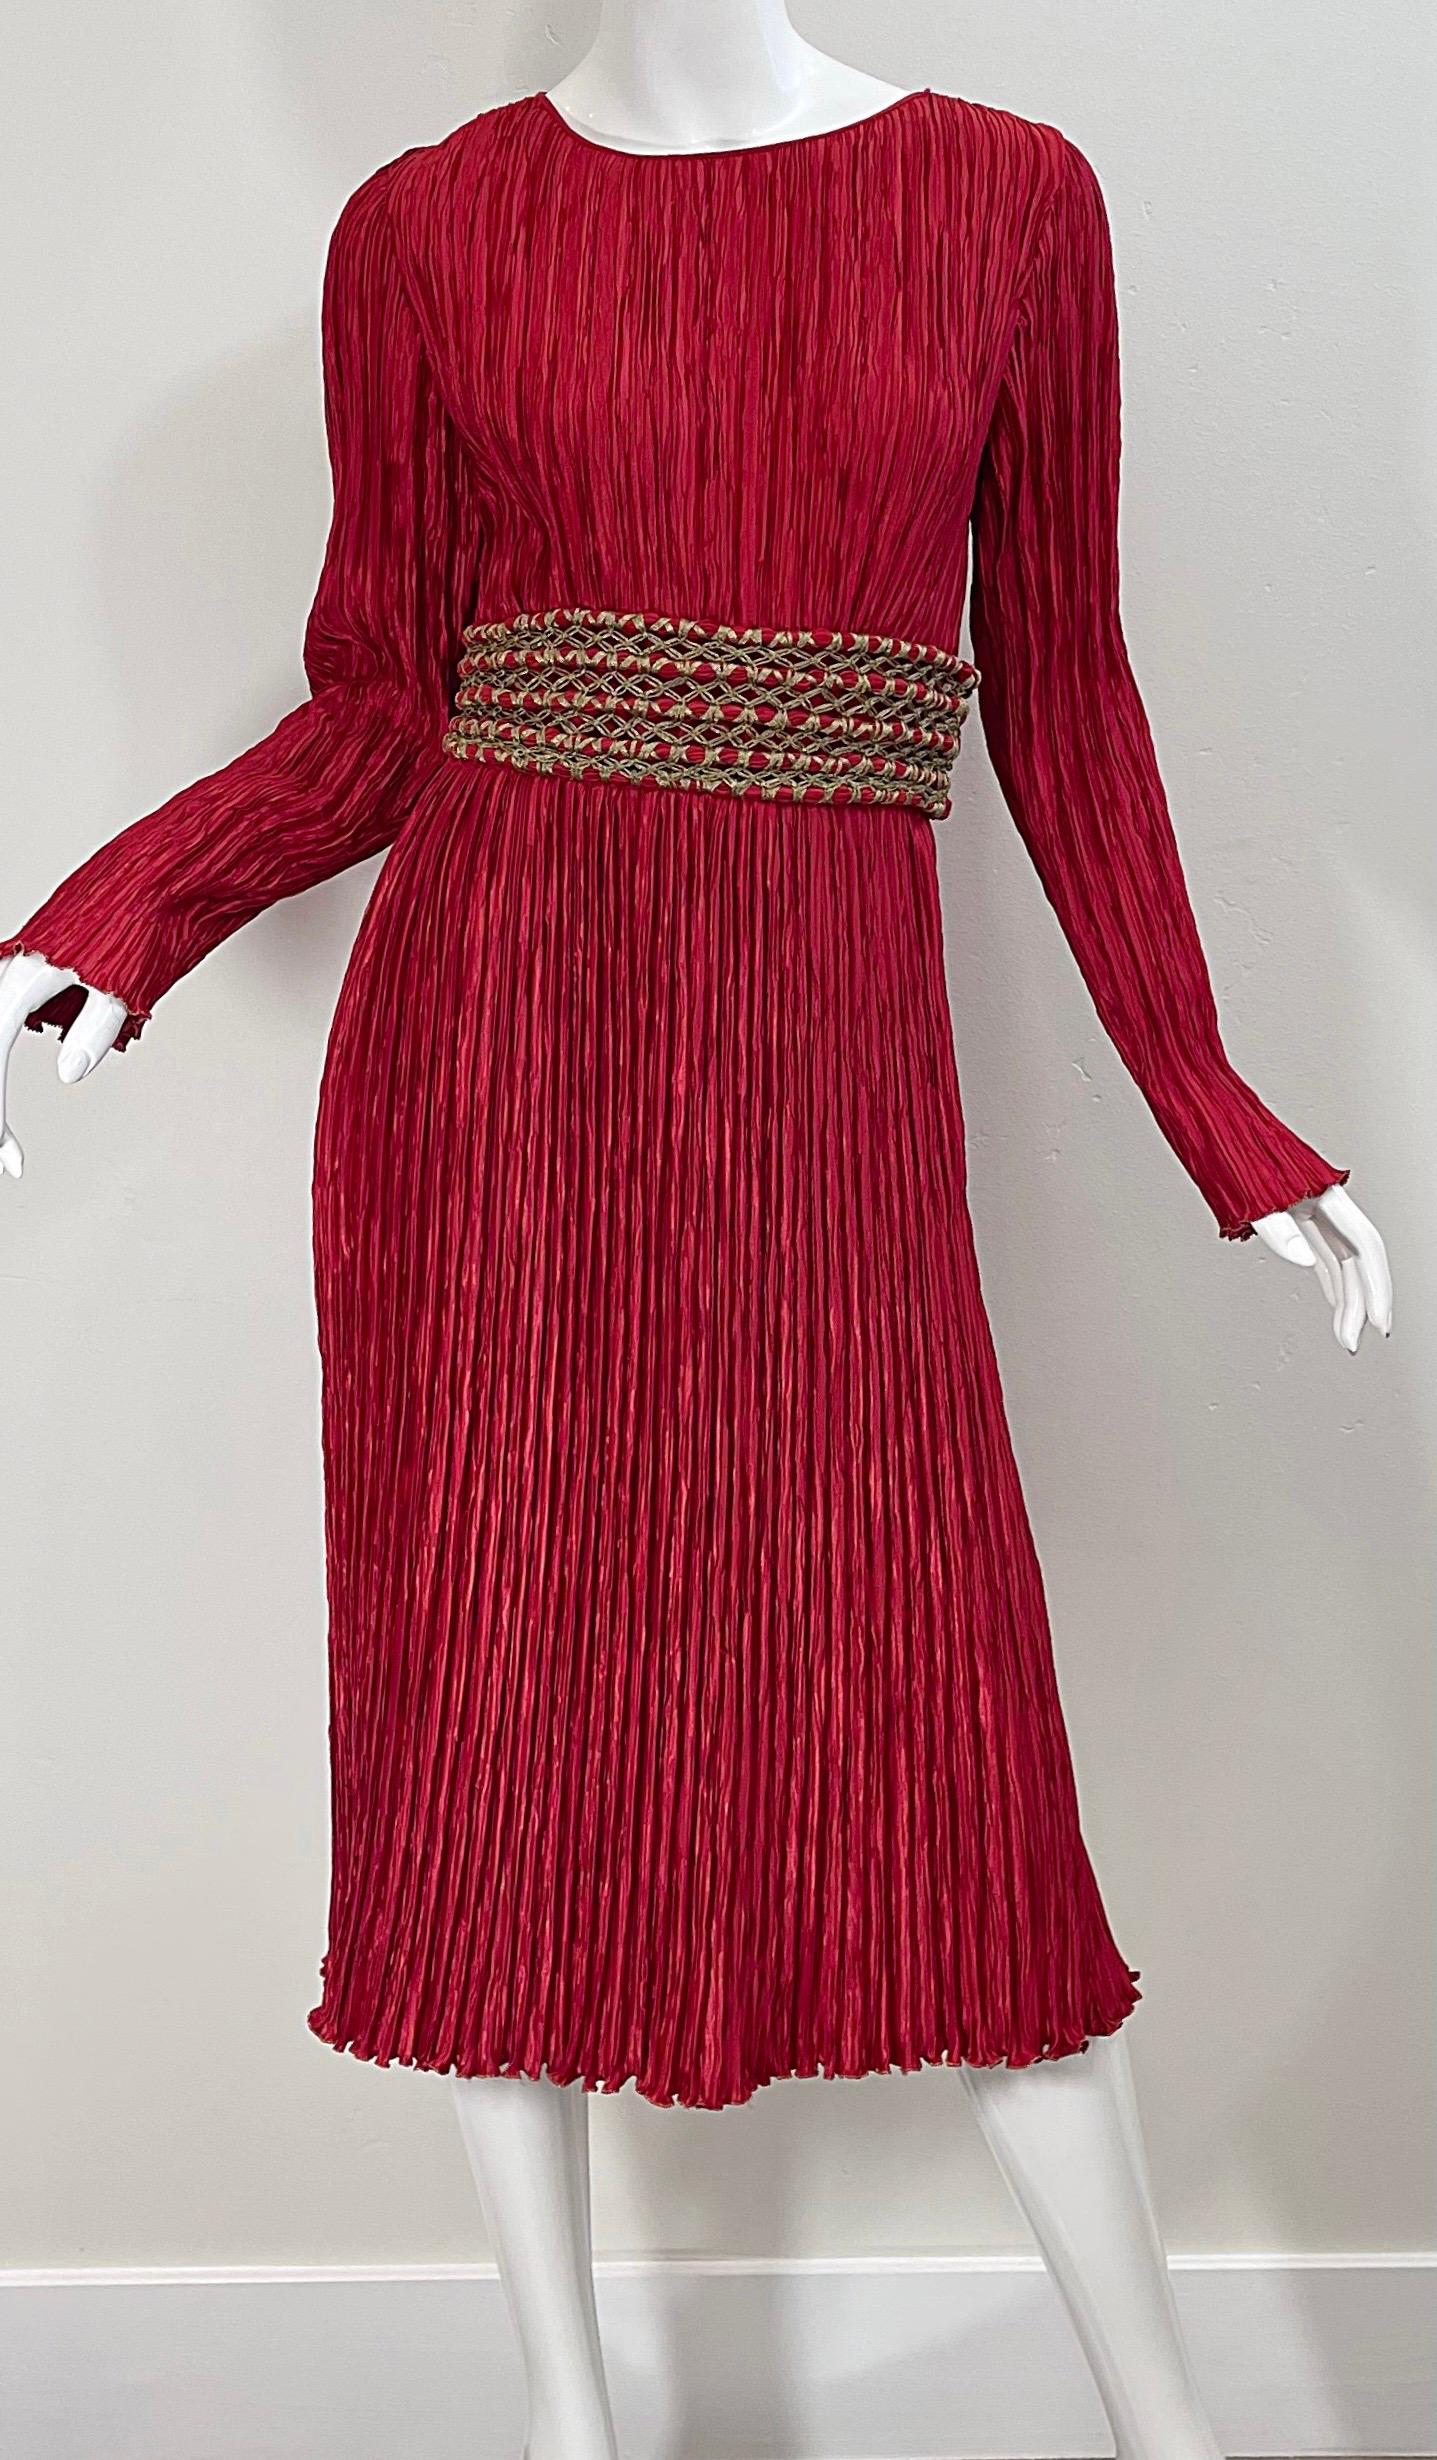 Chic late 1980s MARY MCFADDEN COUTURE crimson red fortuny pleated long sleeve dress ! Features signature flattering fortuny pleating that has plenty of give. Gold embroidered braided belt detail has hook-and-eye closures at the side. Hidden zipper